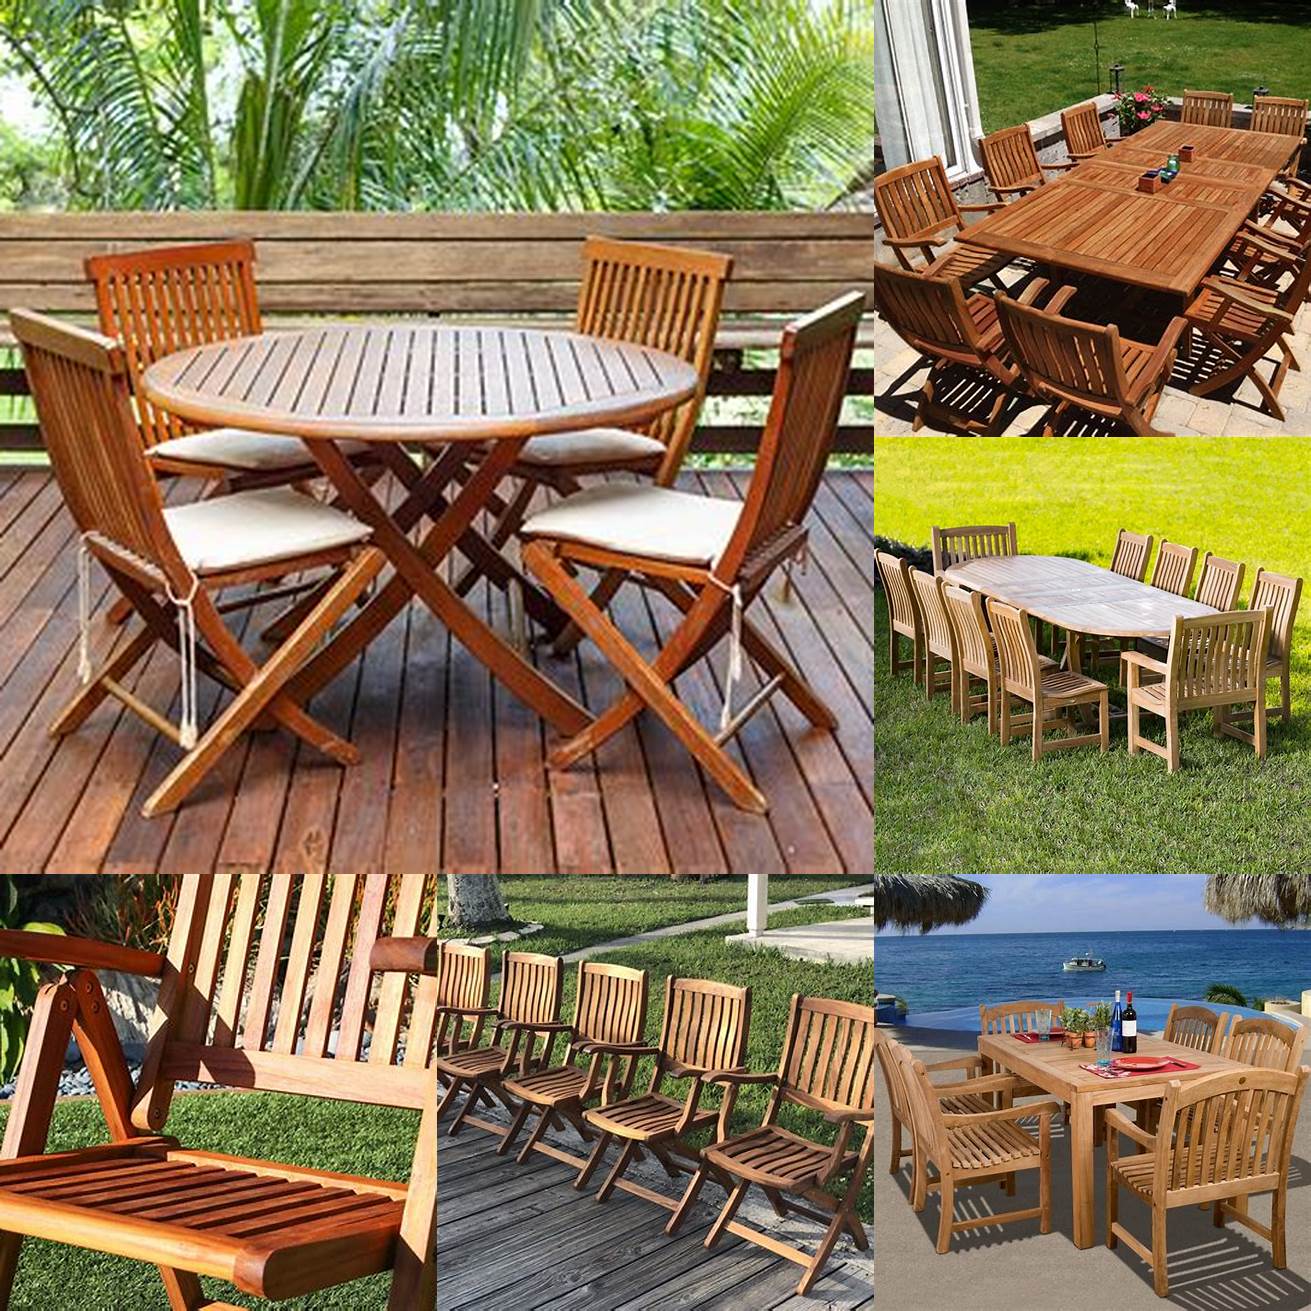 A picture of a person using teak deck furniture